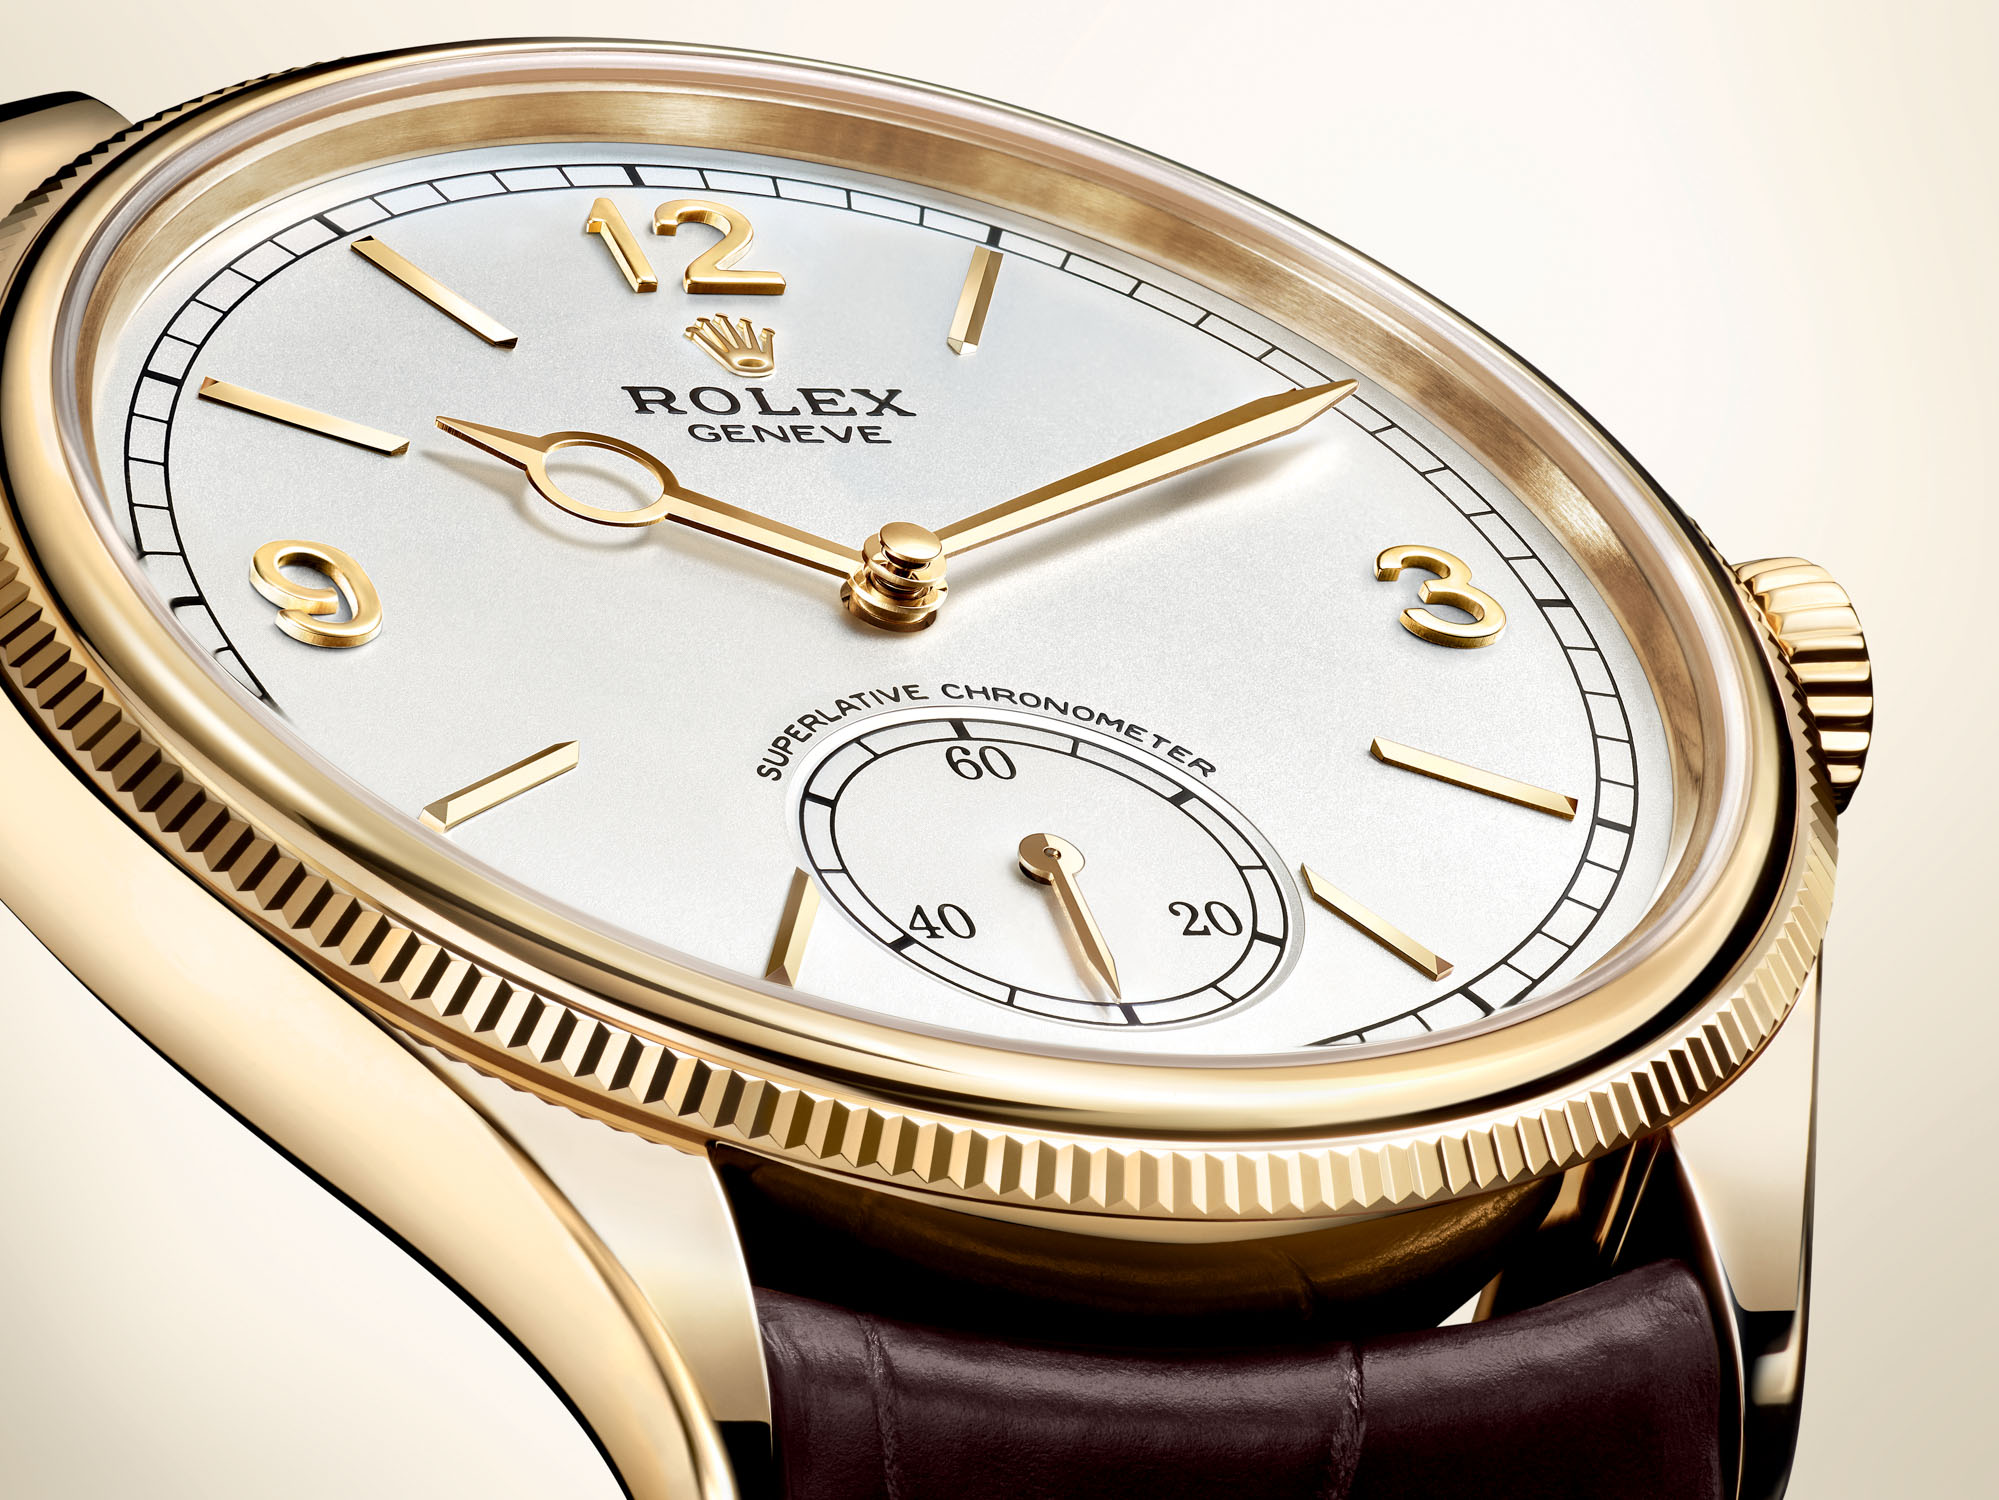 First Look: Rolex Perpetual 1908 52508 Is Brand's First New Watch In Ages | aBlogtoWatch